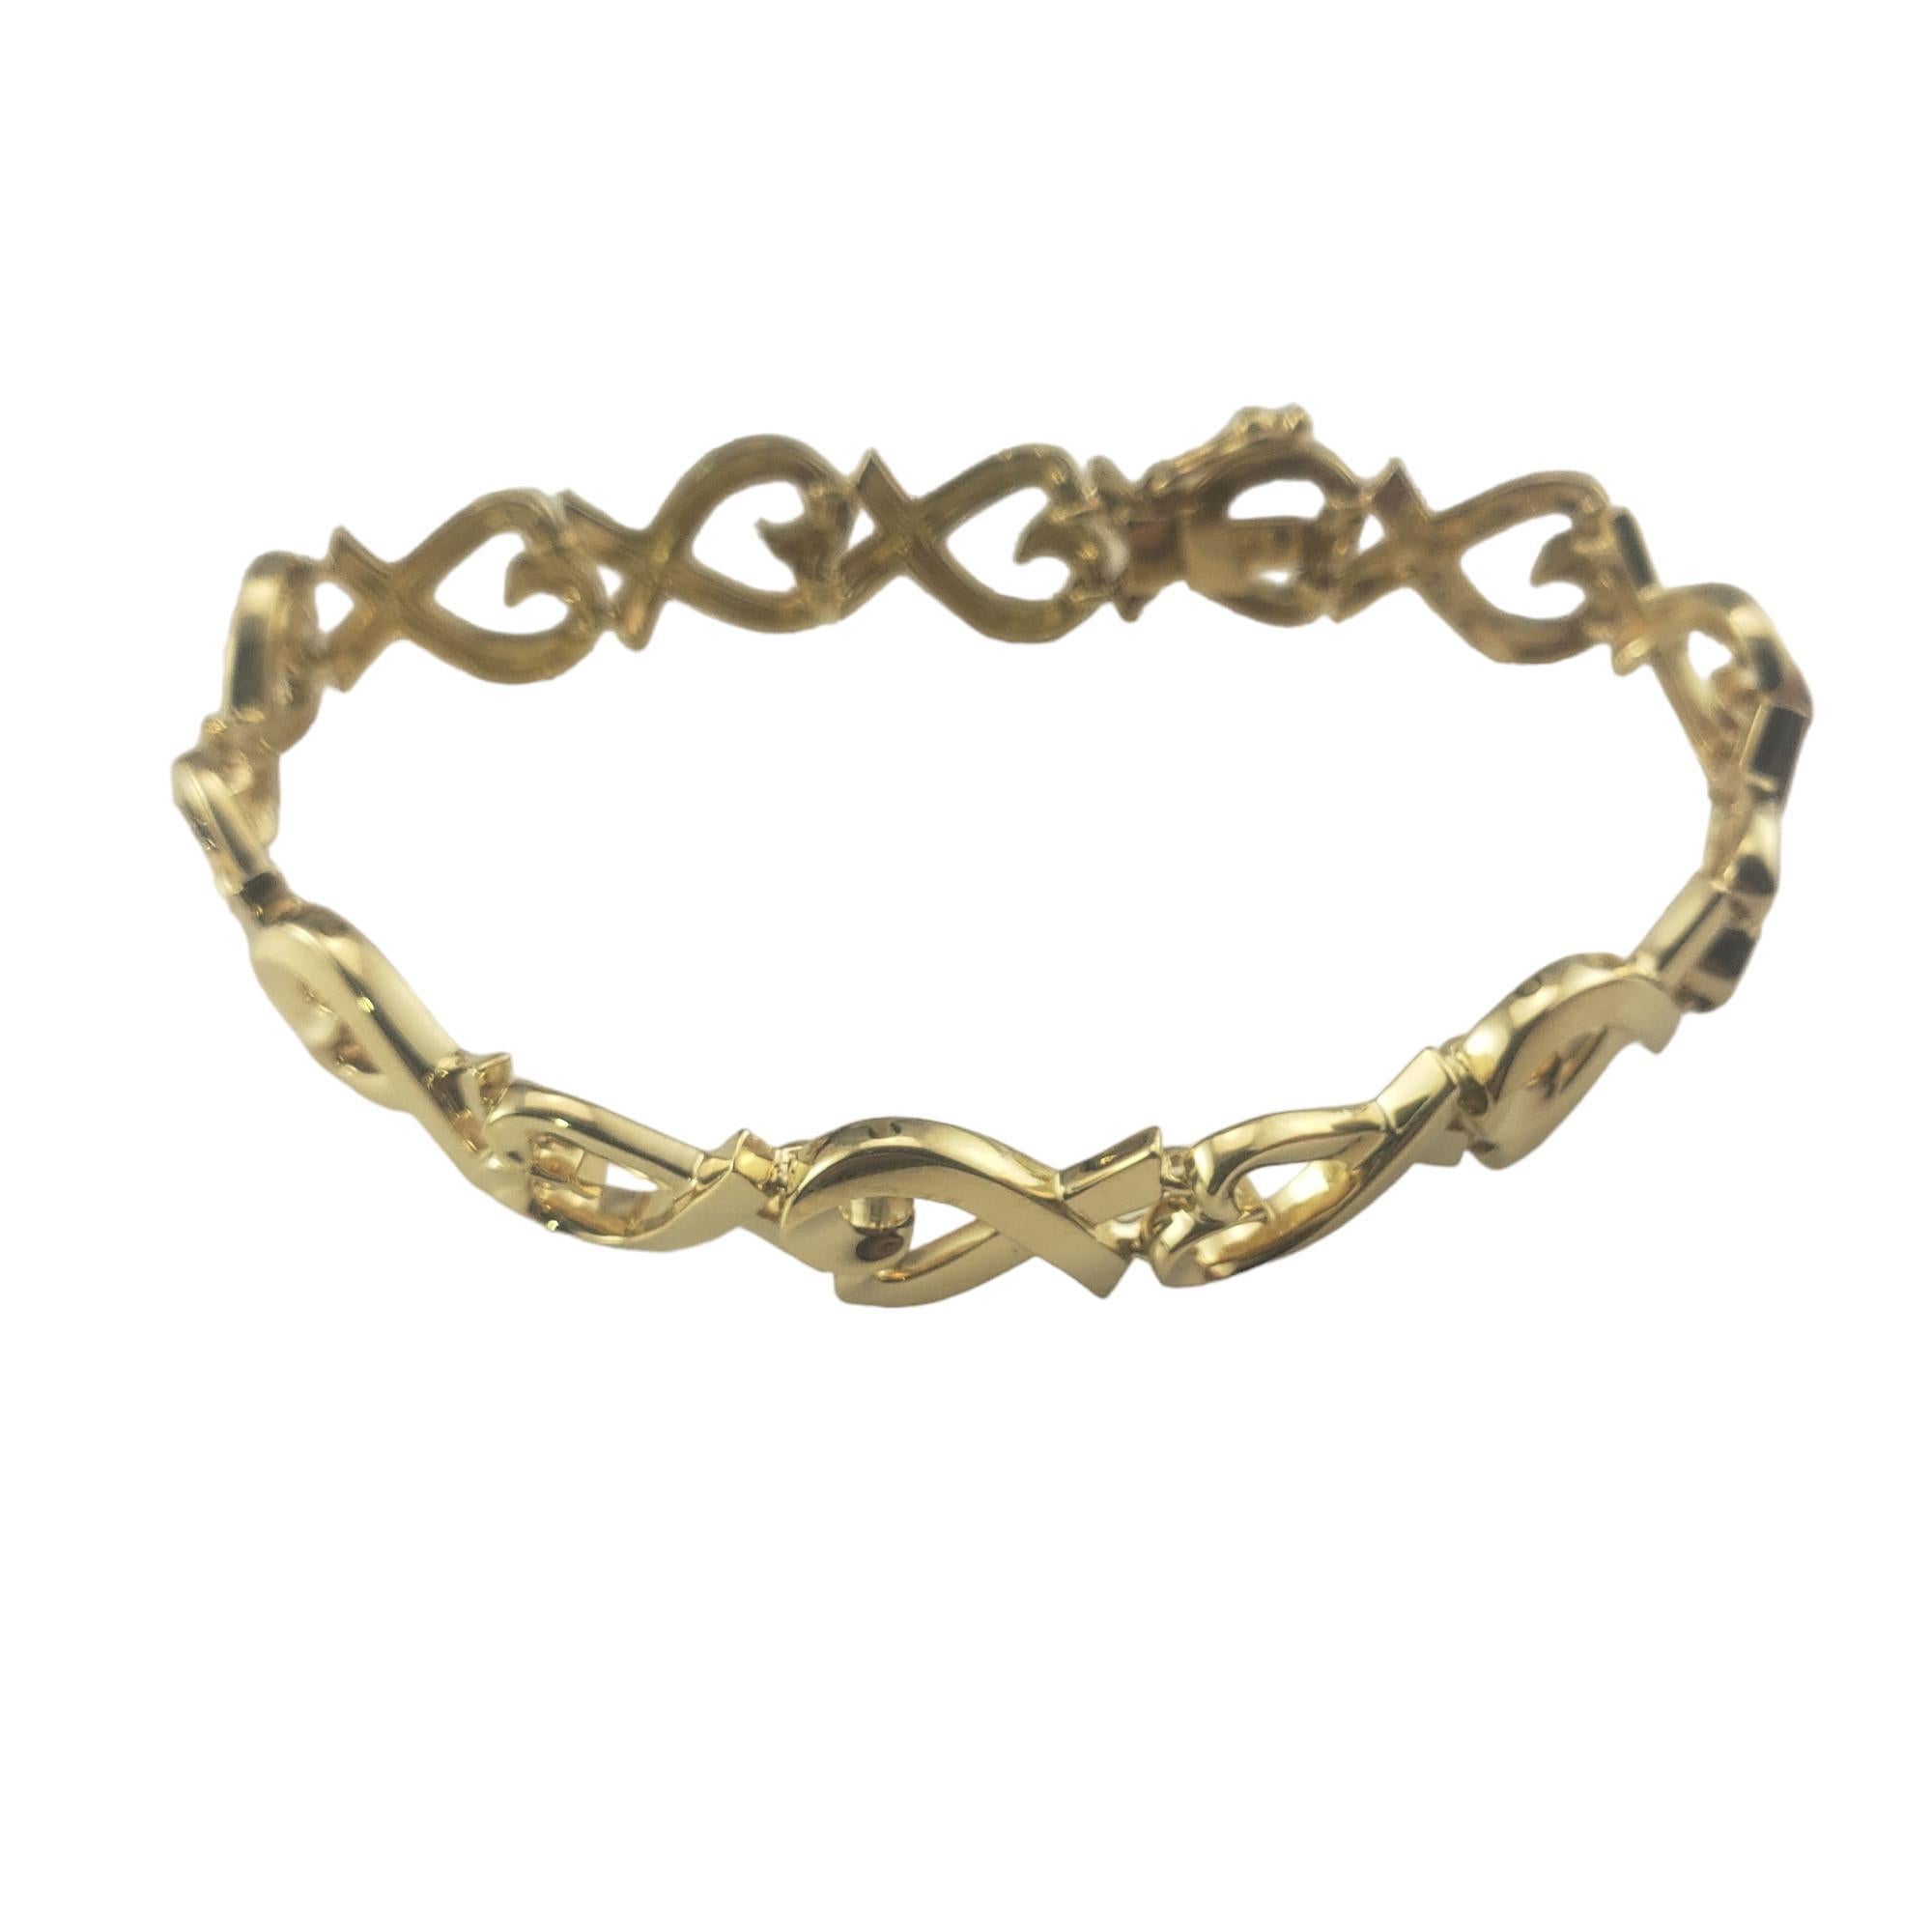 Tiffany & Co. Paloma Picasso 18K Yellow Gold Heart Bracelet #16794 In Good Condition For Sale In Washington Depot, CT